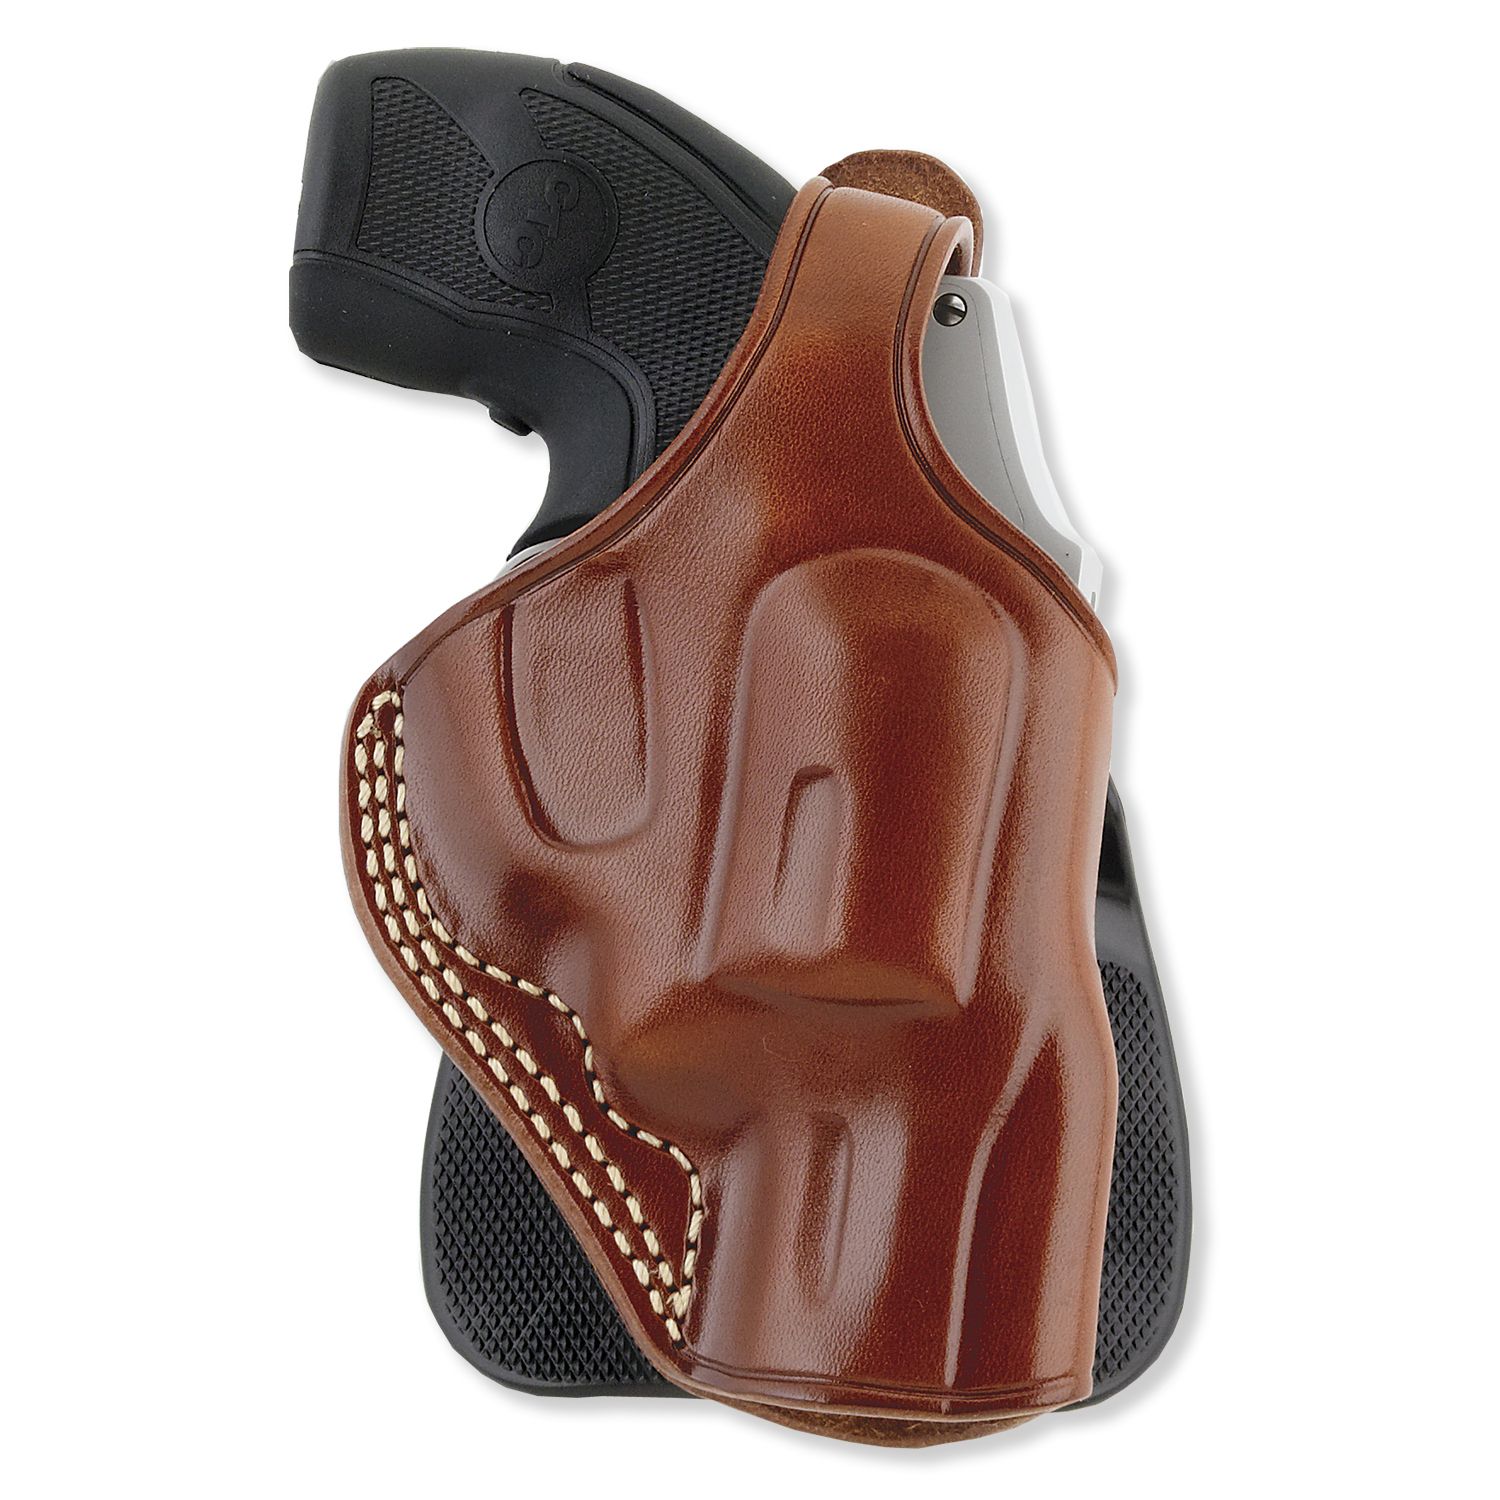 Galco Professional Law Enforcement Paddle Holster Right Hand Tan - : PLE204